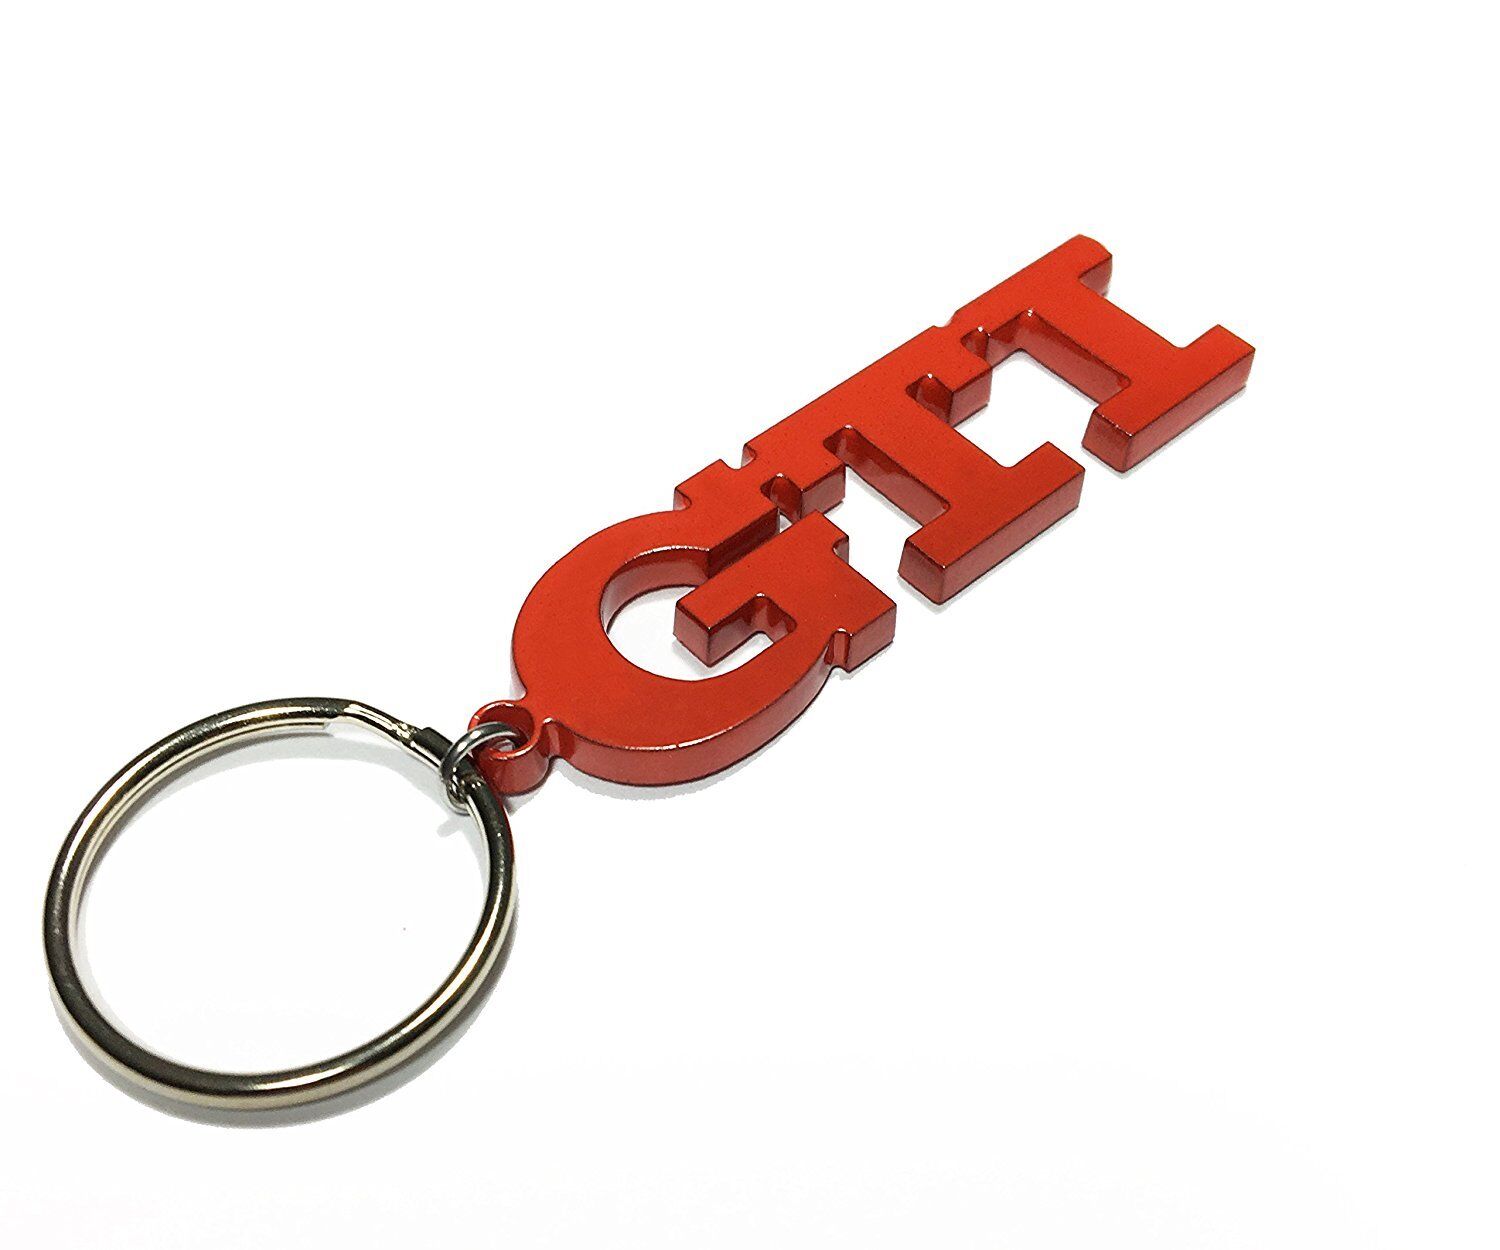 GTI Key Chain, Stainless steel ( RED) For VW GTI